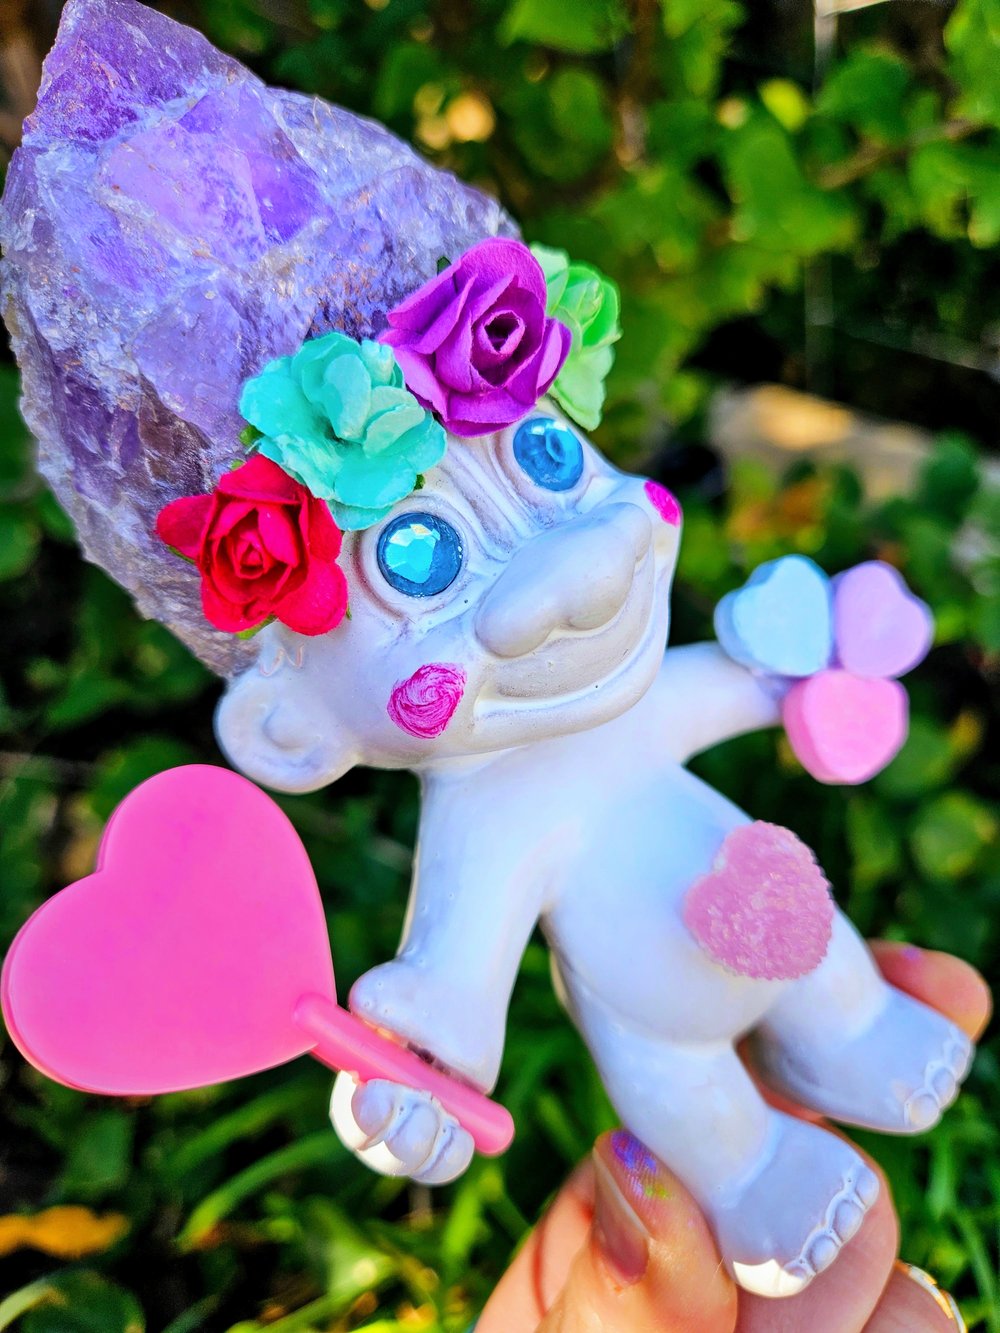 Amethyst Candy Heart Troll with Pink Personalized Candy Heart MSG 6"